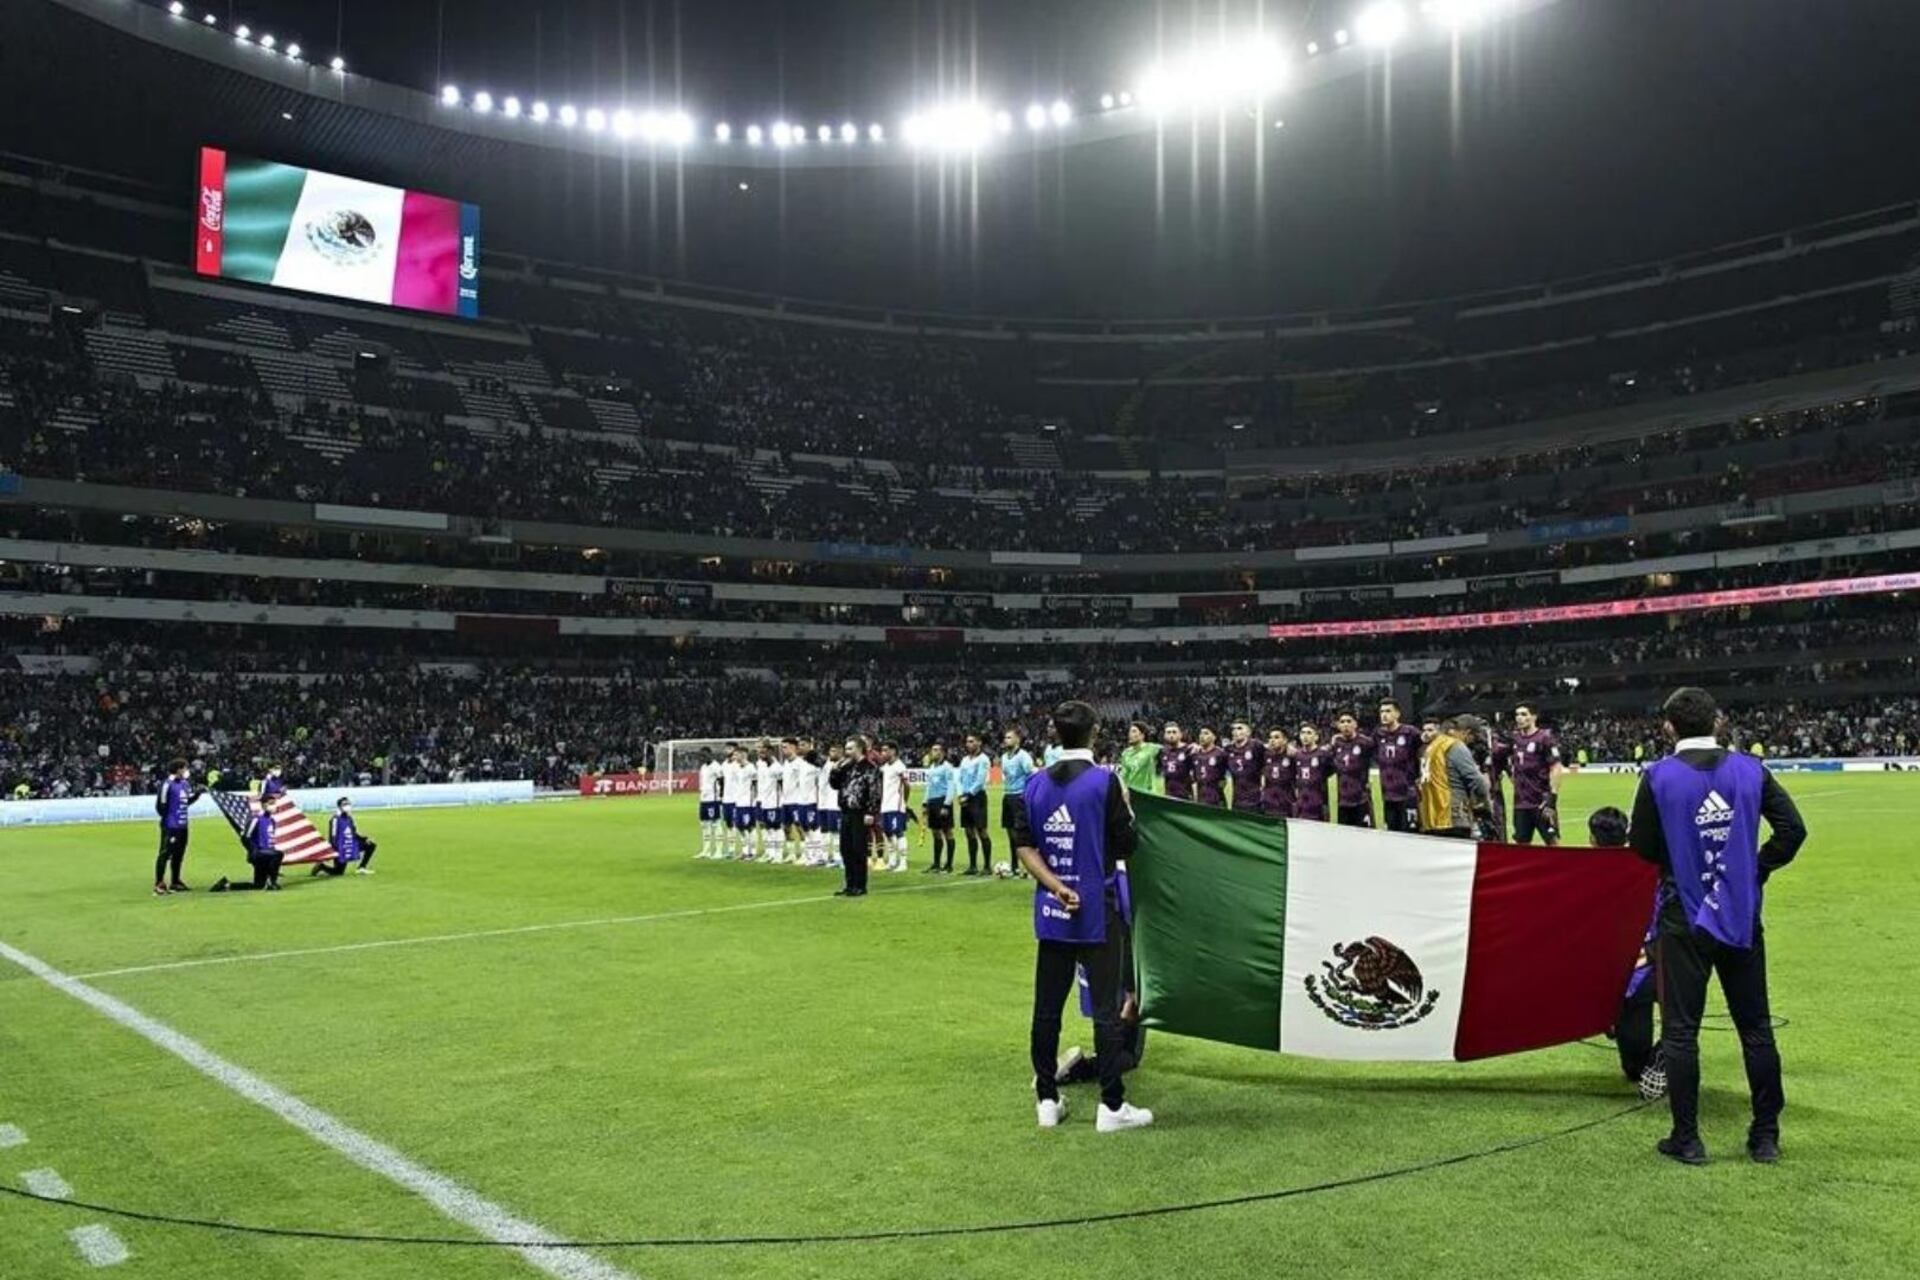 The silent hero in the scoreless draw between Mexico National Team and USMNT